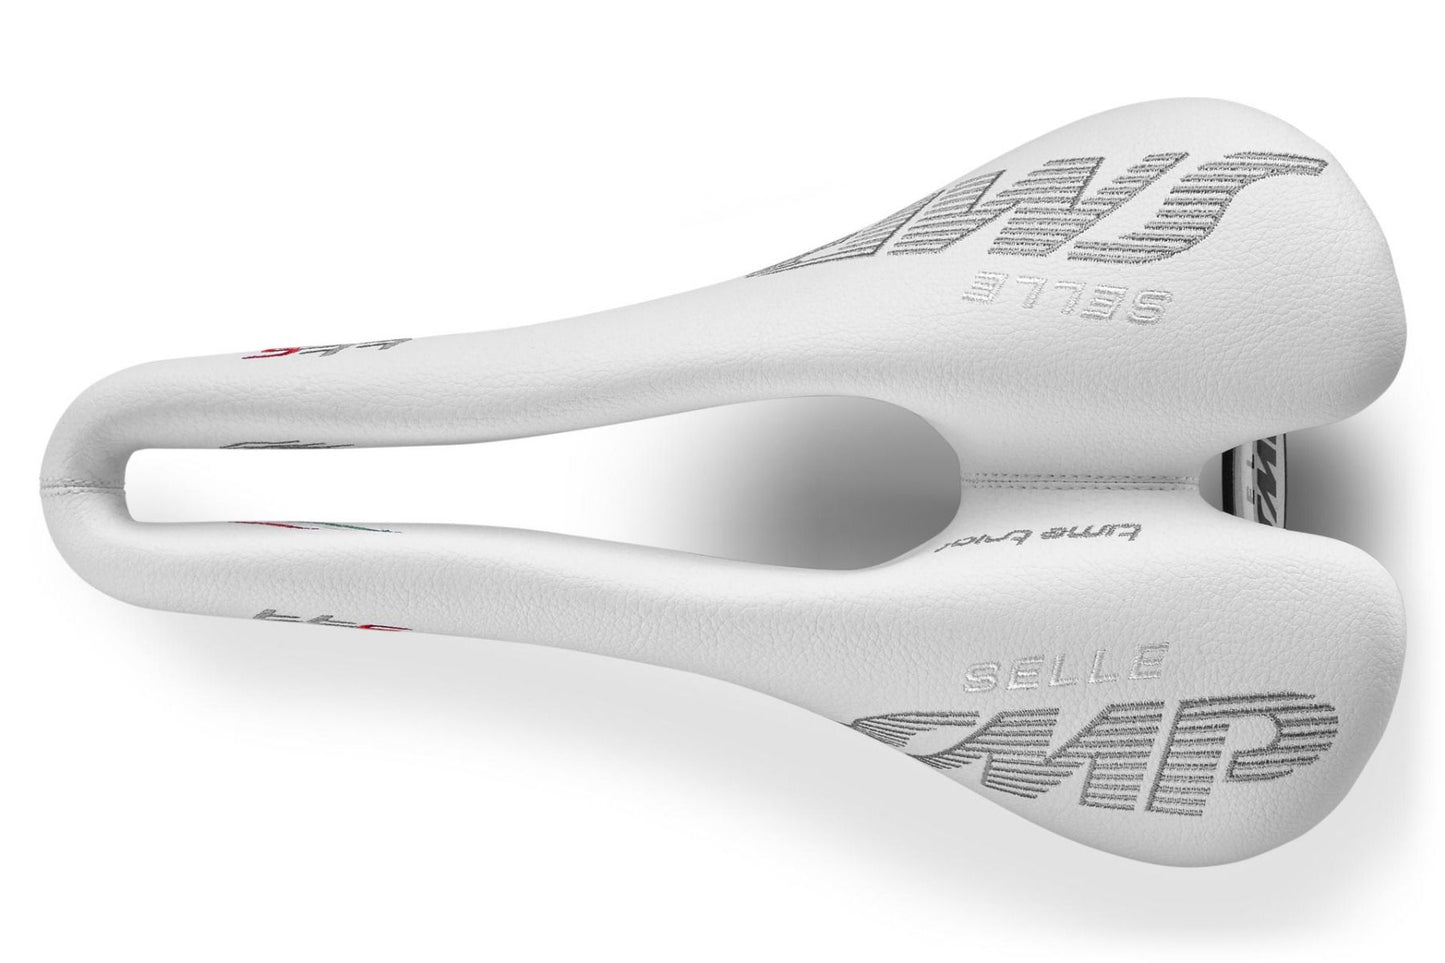 Selle SMP TT4 Time Trial Saddle with Steel Rails (White)